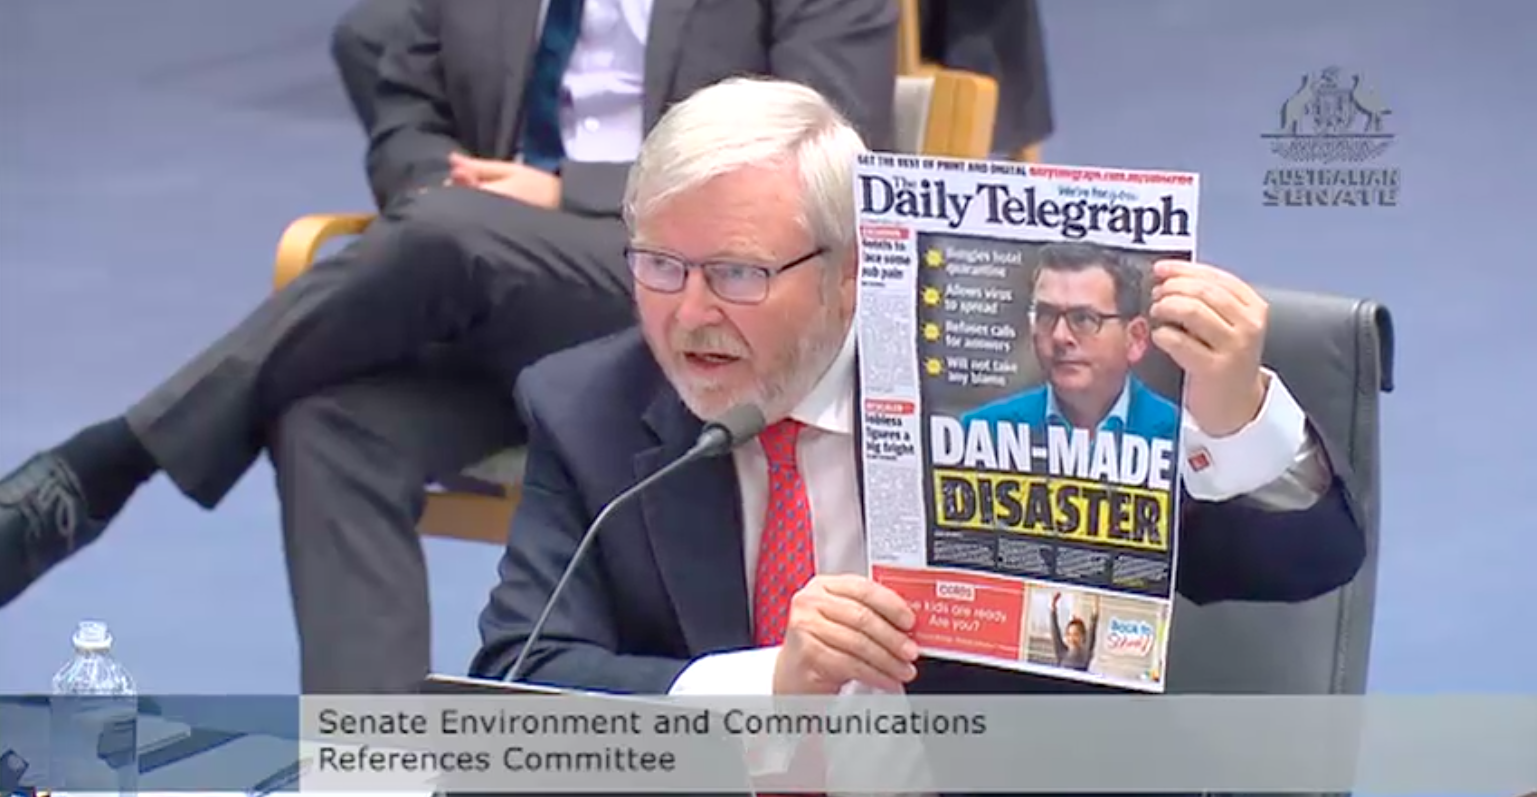 Kevin Rudd appearing at the Senate inquiry into media diversity holding up a cover from the Daily Telegraph, a News Corp publication owned by Rupert Murdoch